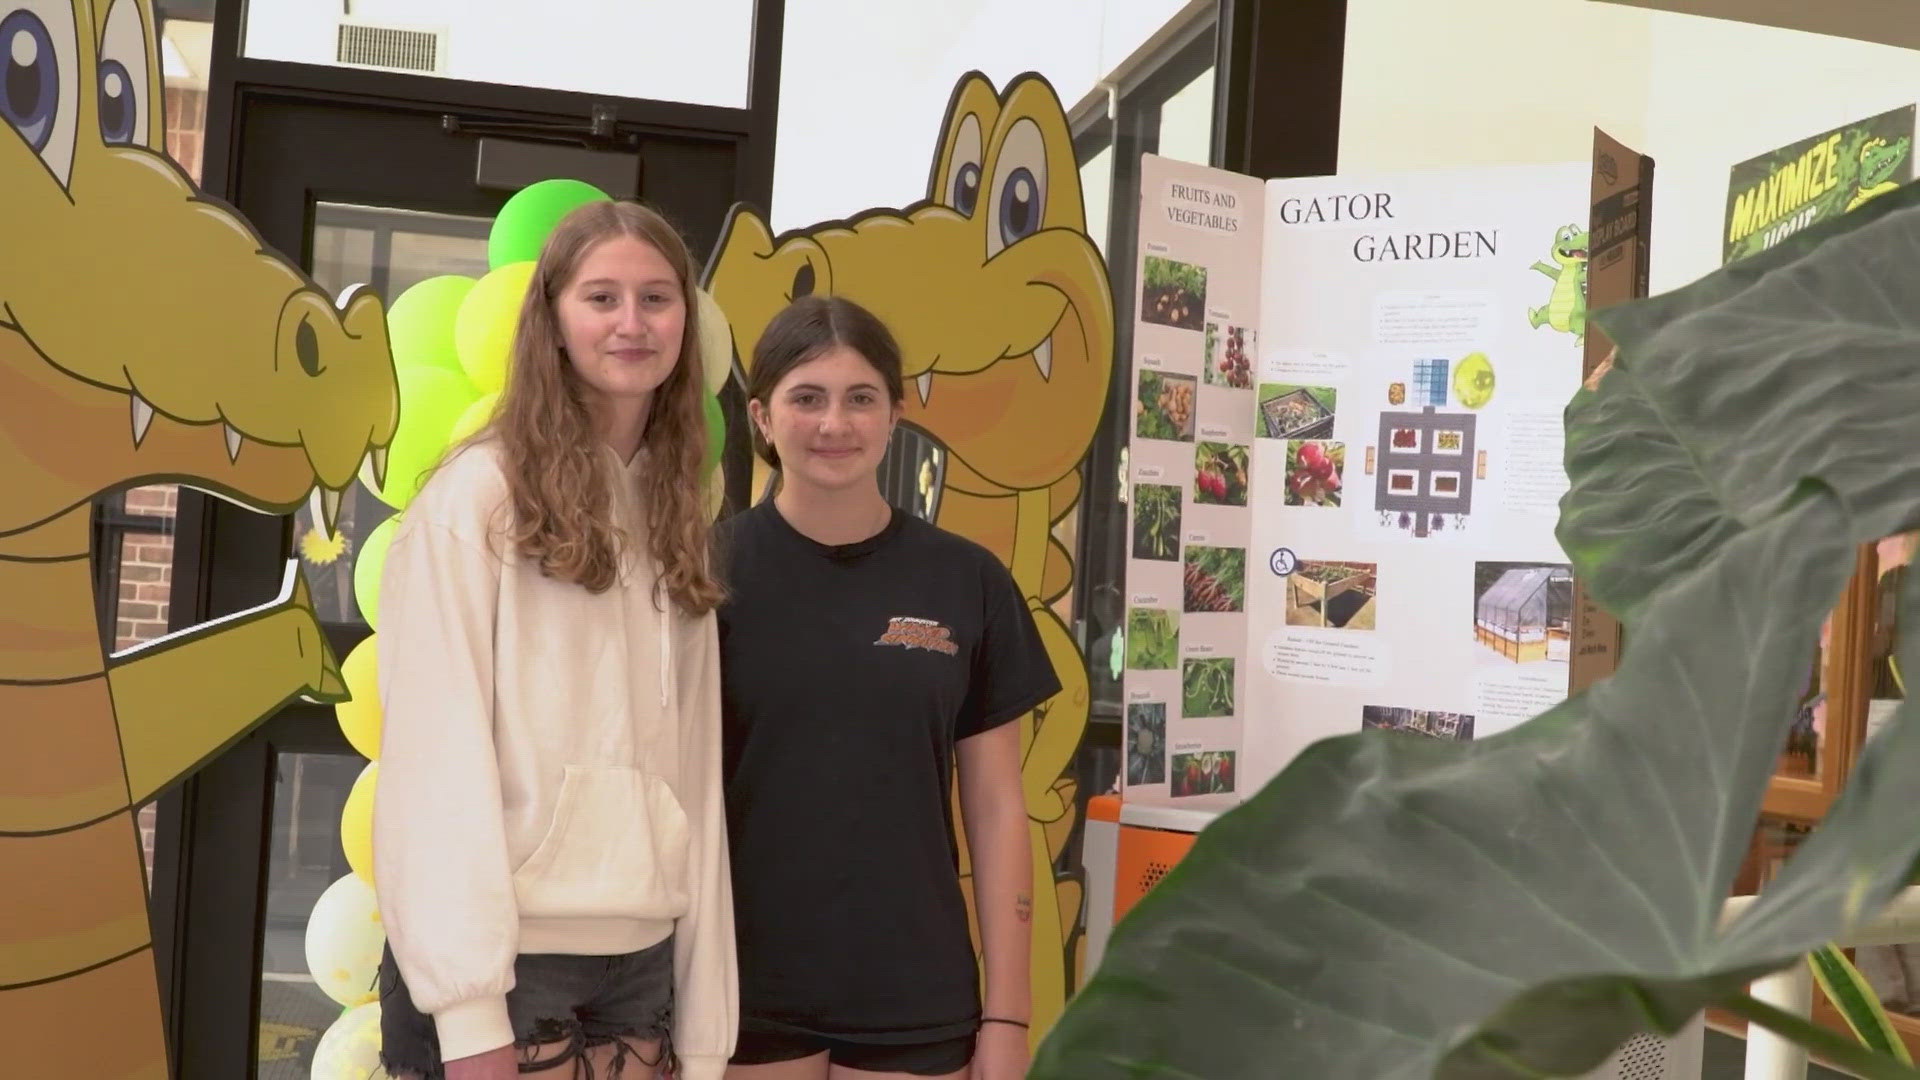 If you aren't familiar, we asked middle school teachers to submit their environmental project ideas for a chance to win $5,000 from Washington Gas.